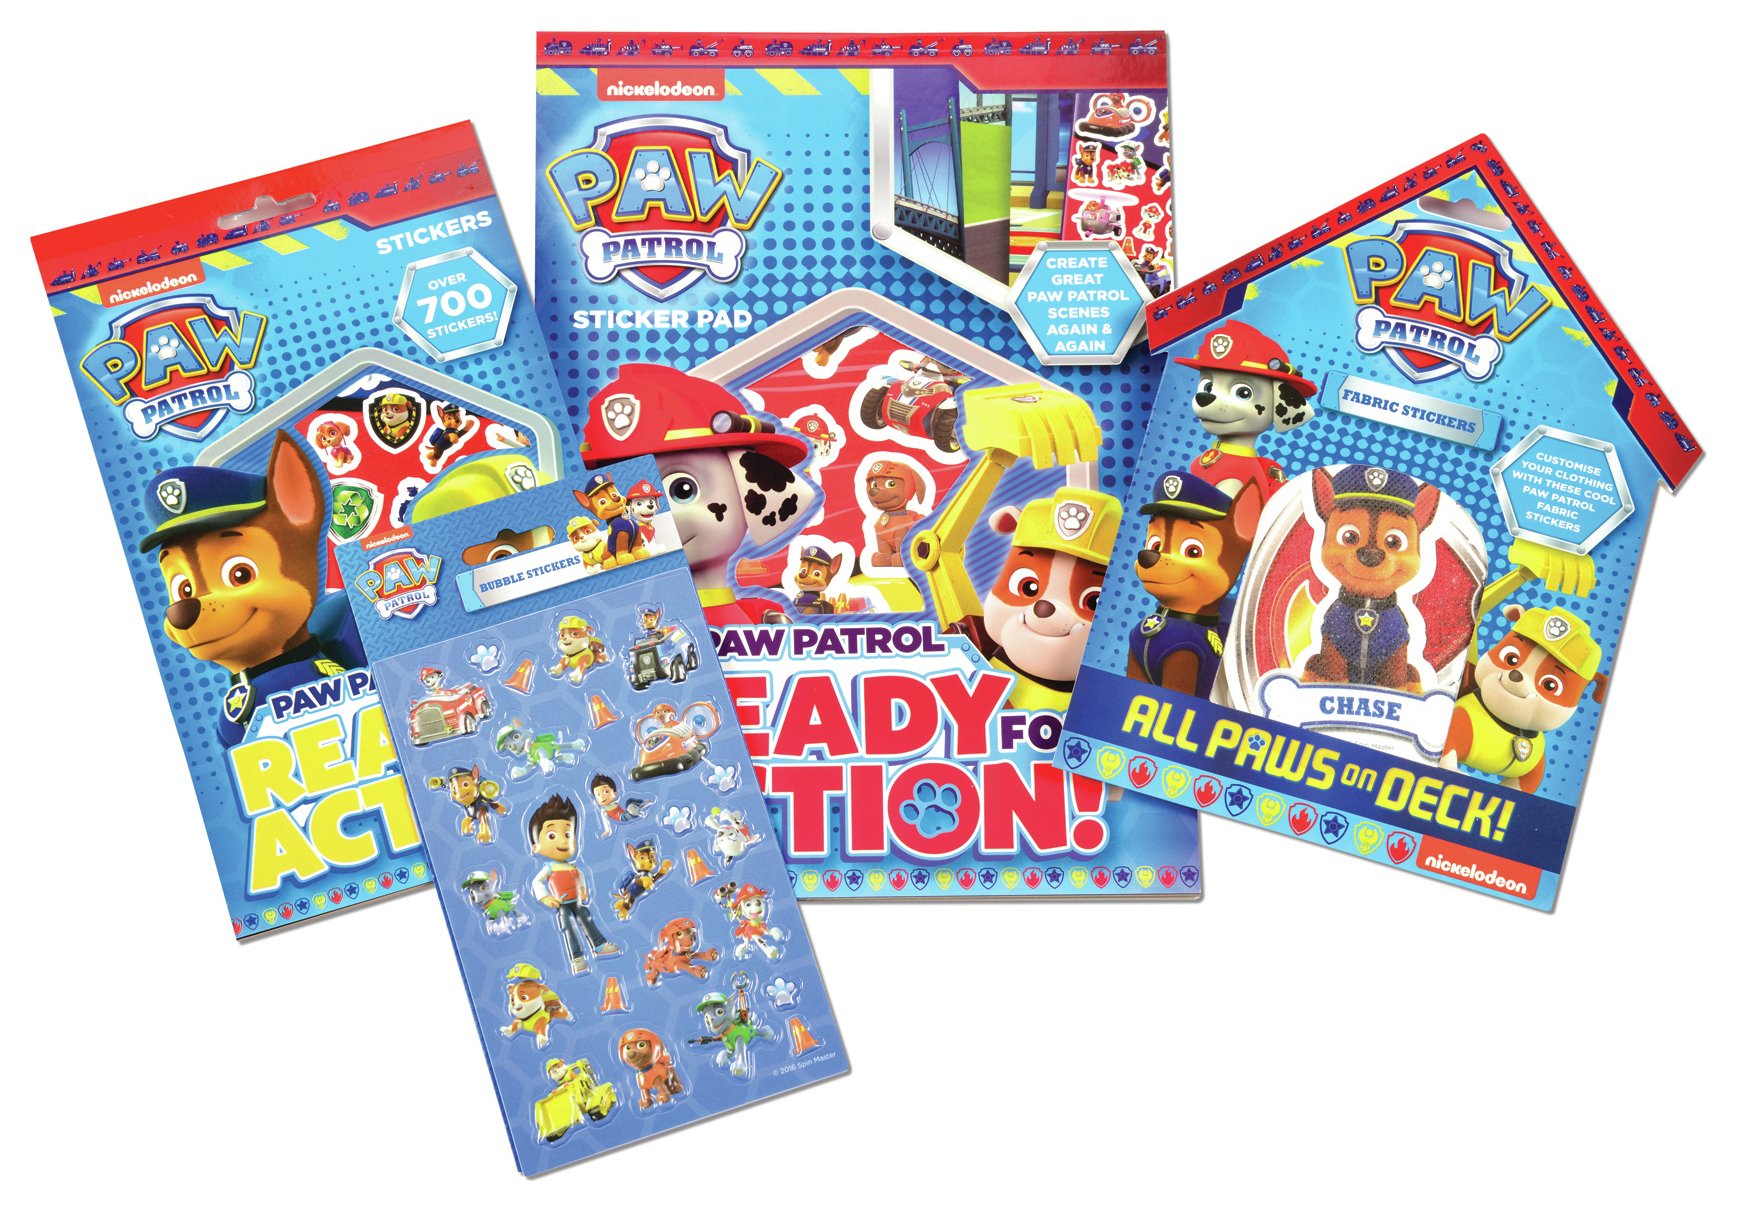 paw-patrol-bundle-pack-700-stickers-review-review-toys